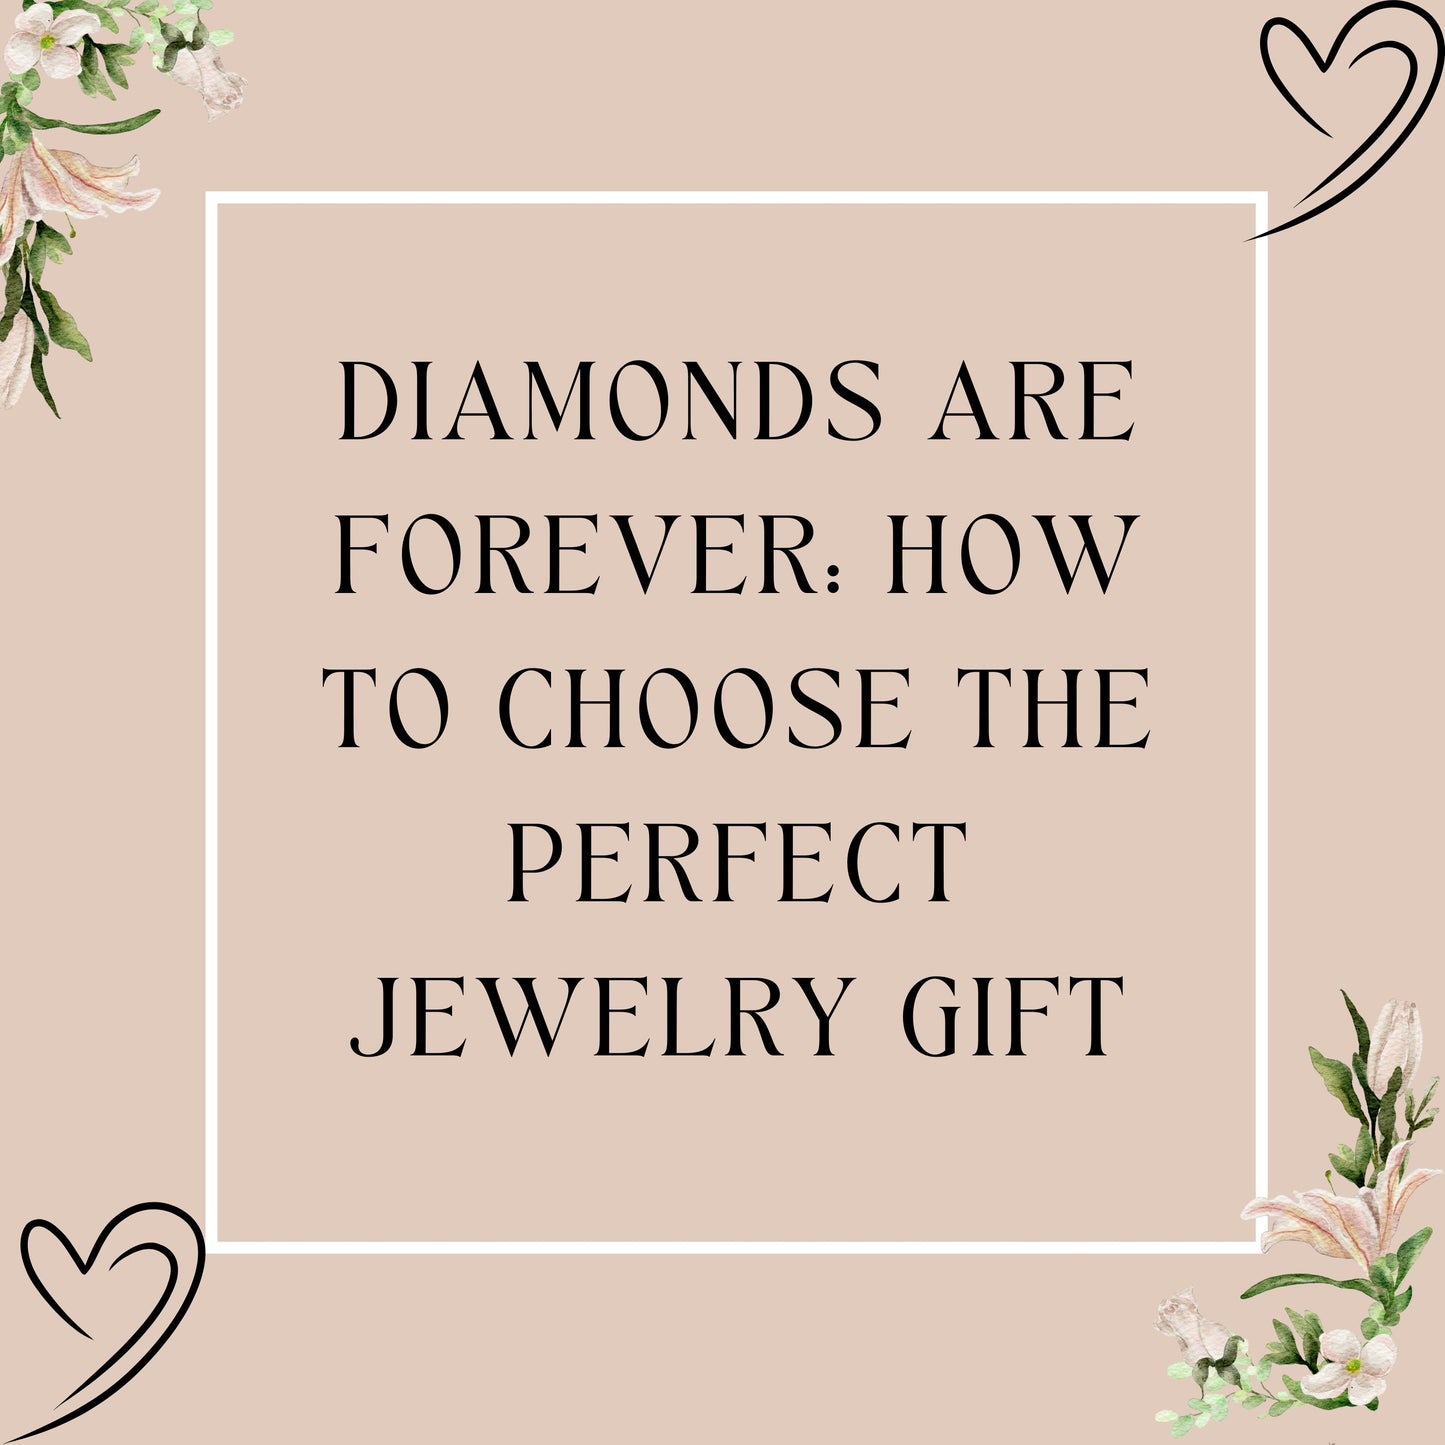 Diamonds Are Forever: How to Choose the Perfect Jewelry Gift